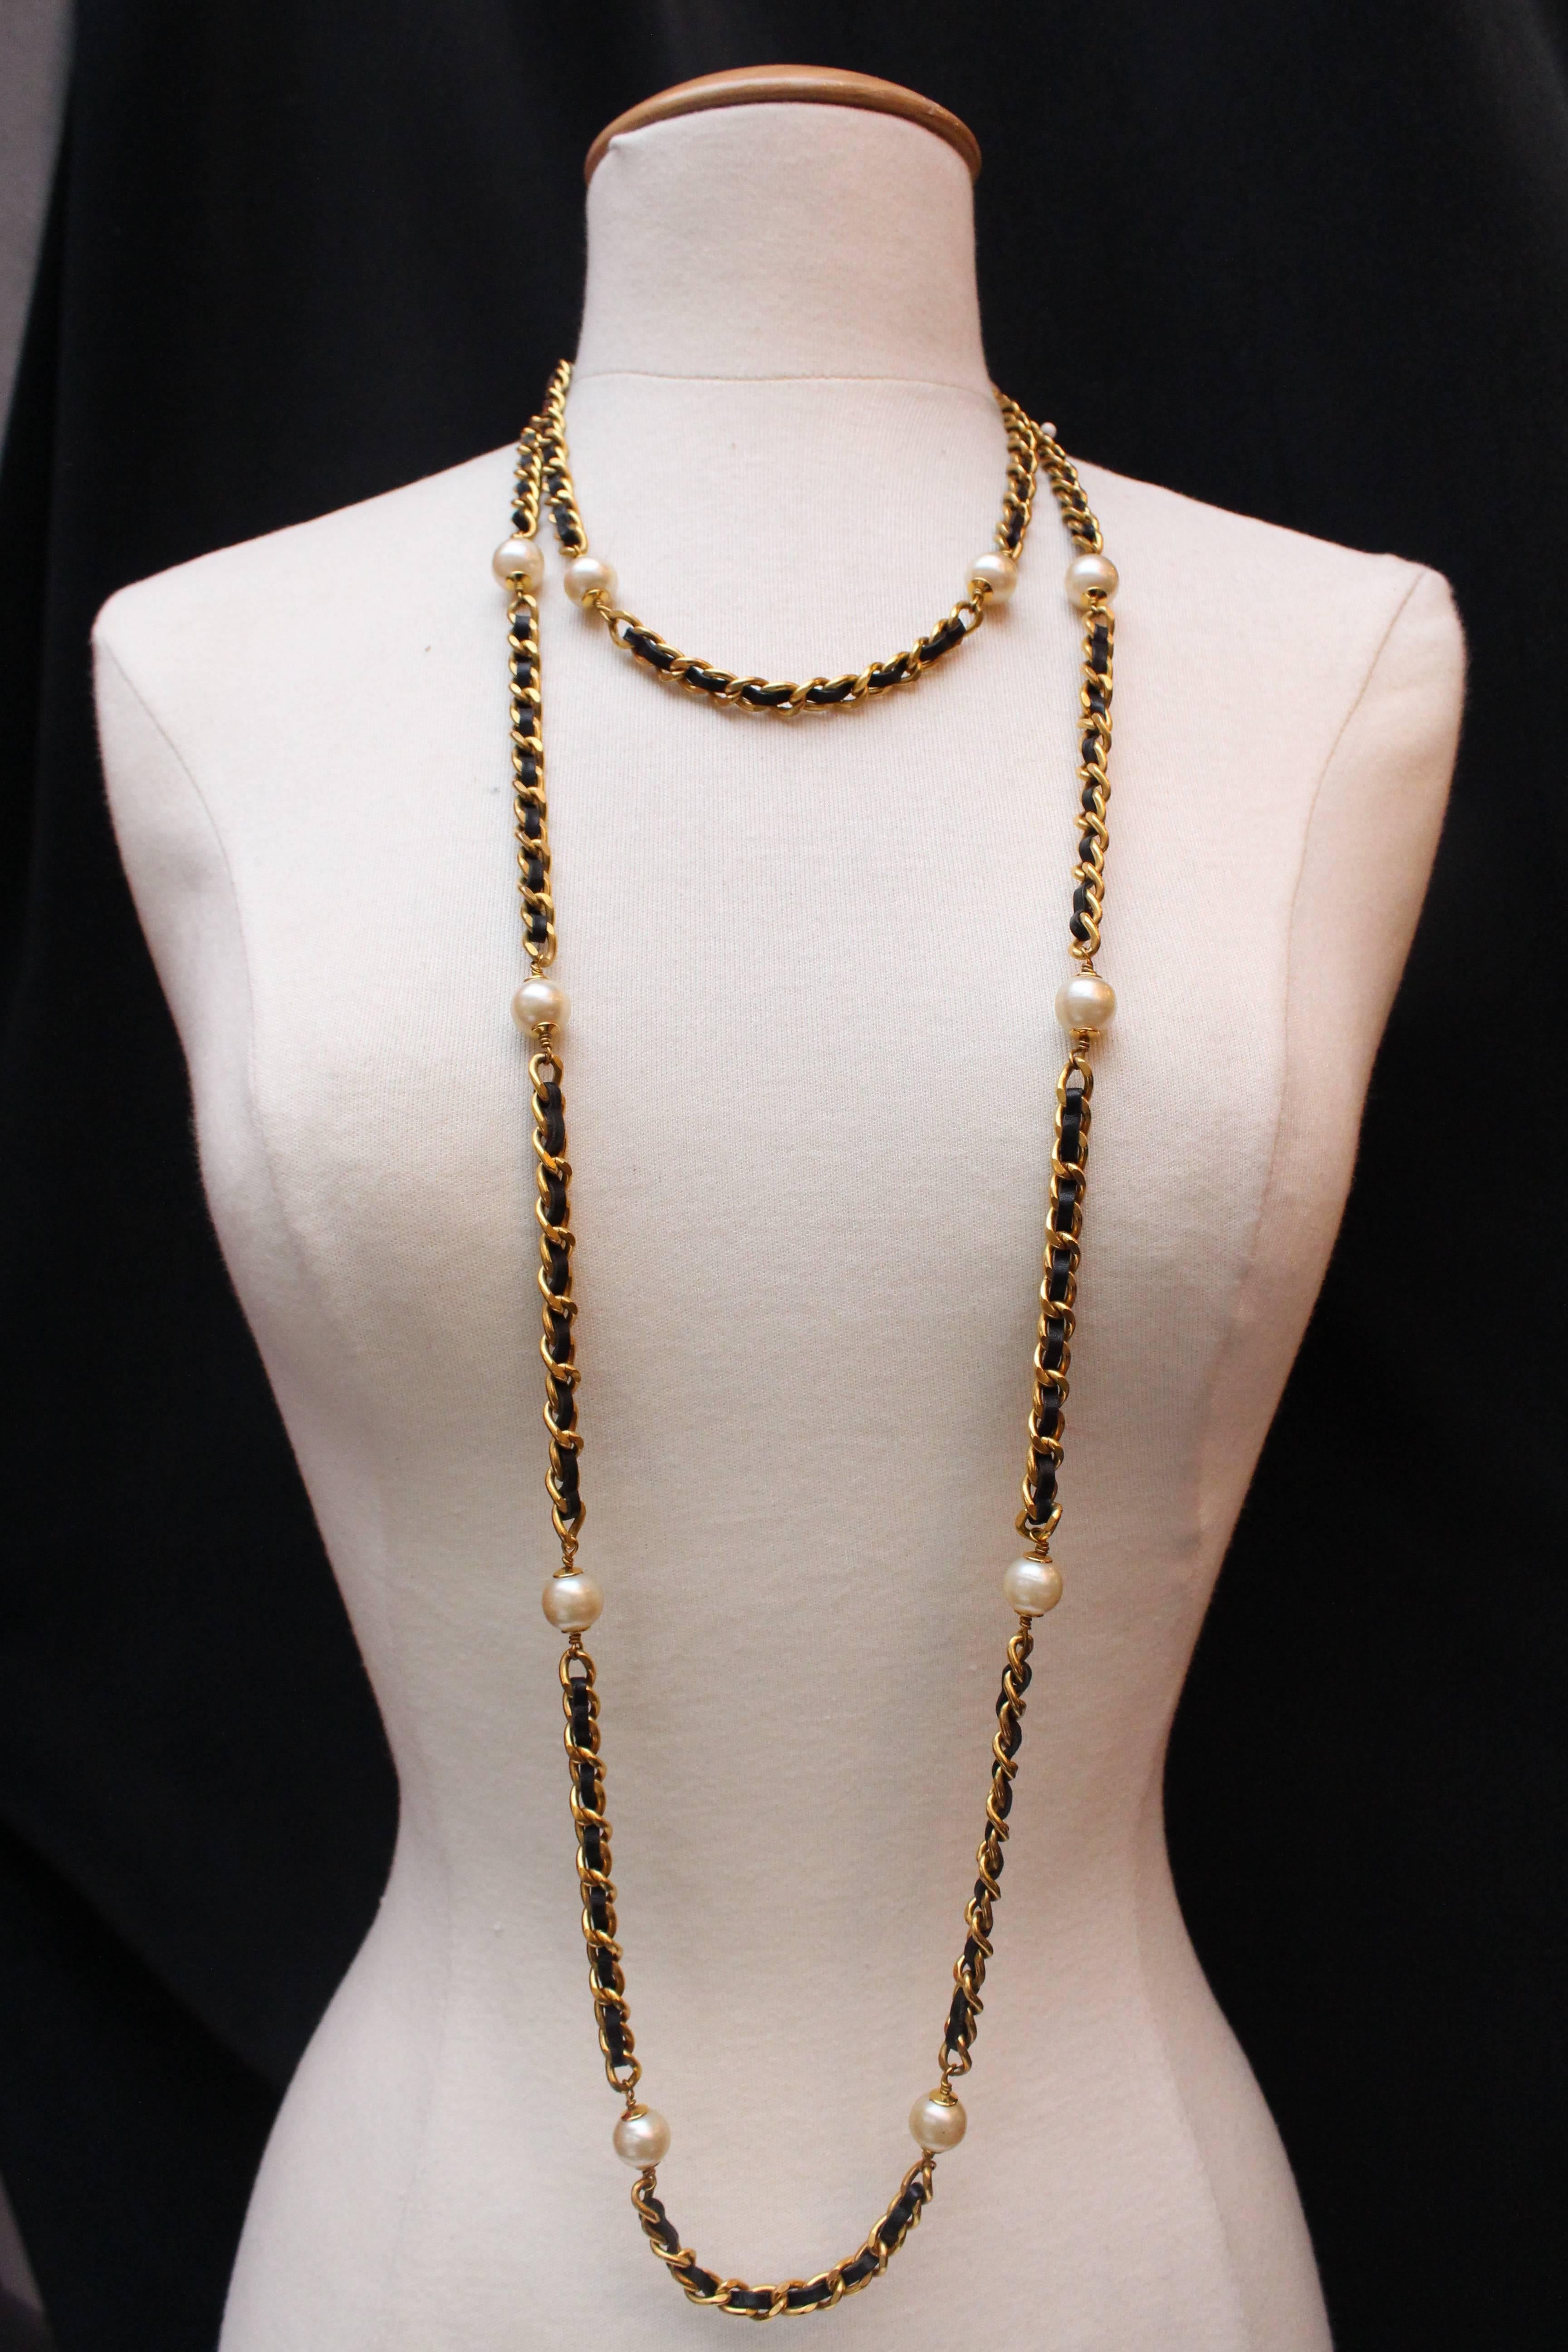 Women's Chanel long chain sautoir composed of black leather and gilded metal chain, 1993